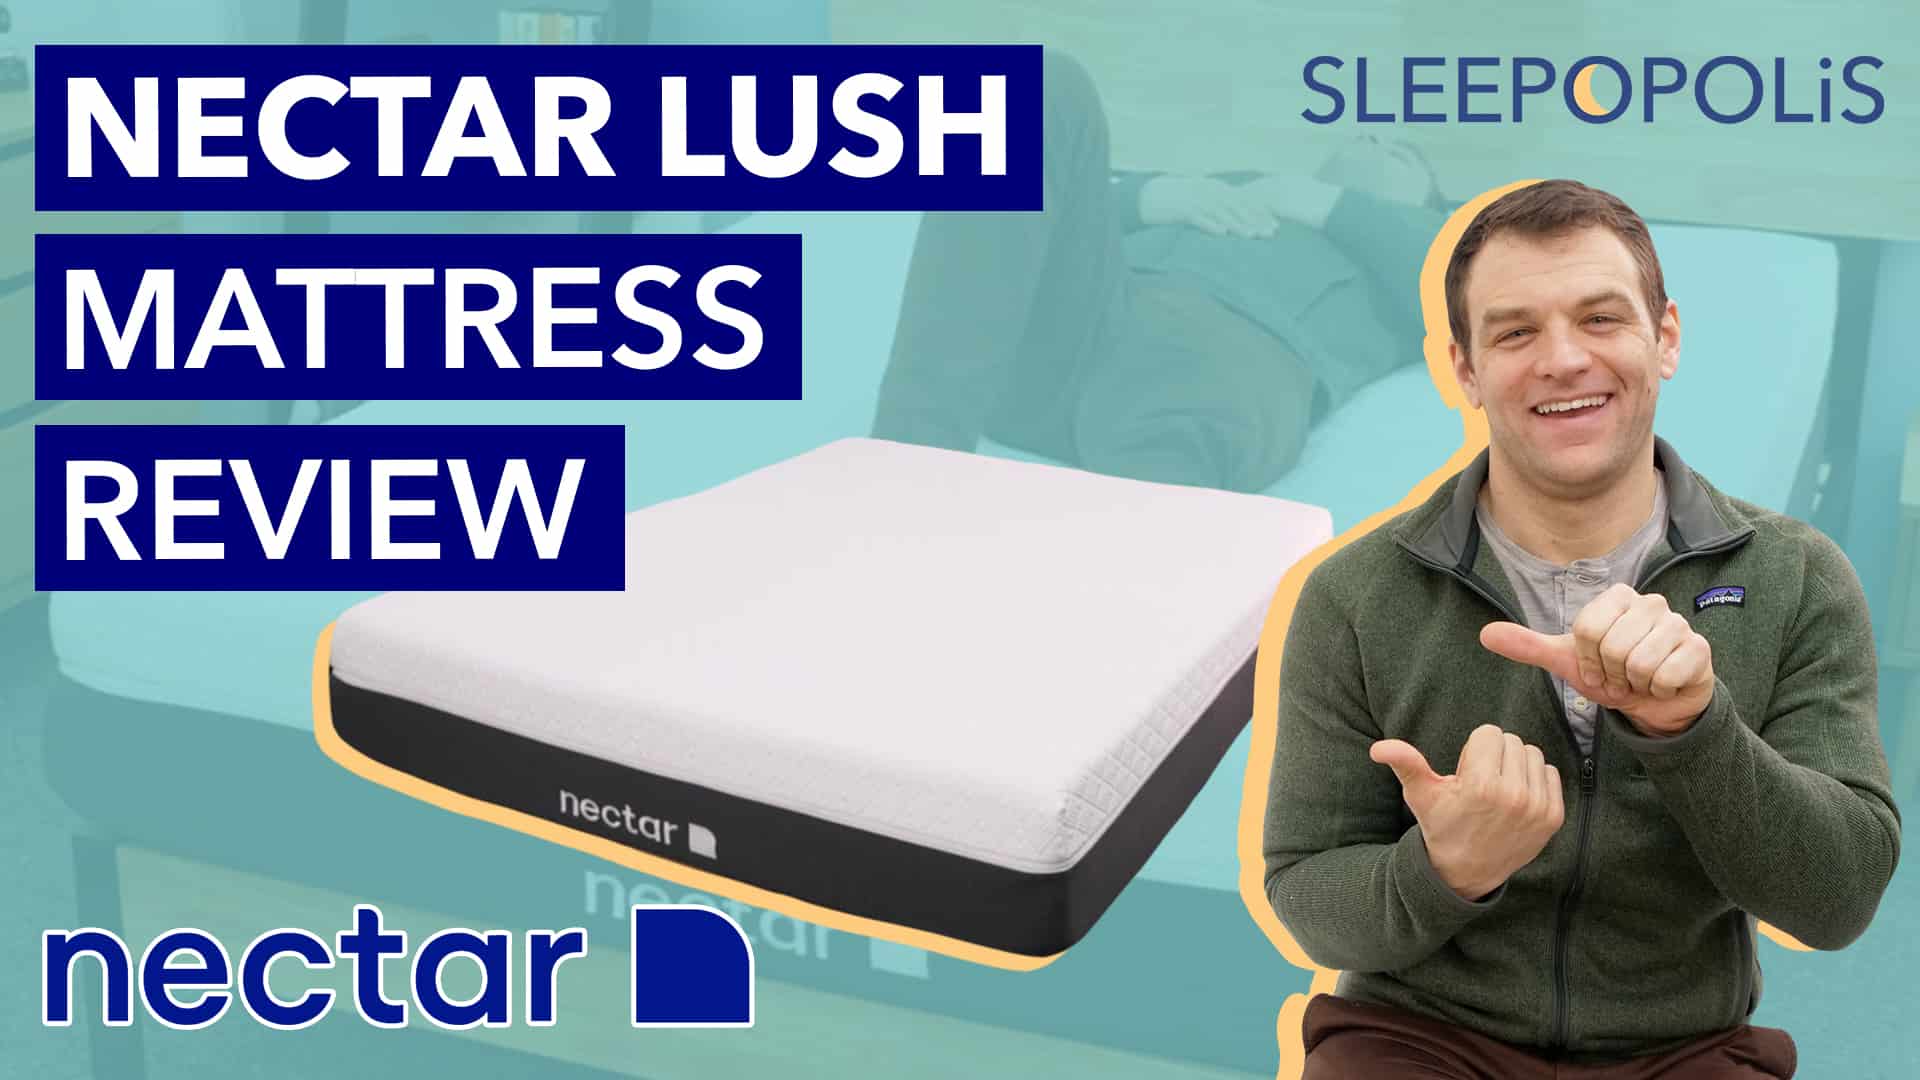 Learn all about it in our Nectar Lush Mattress Review! 